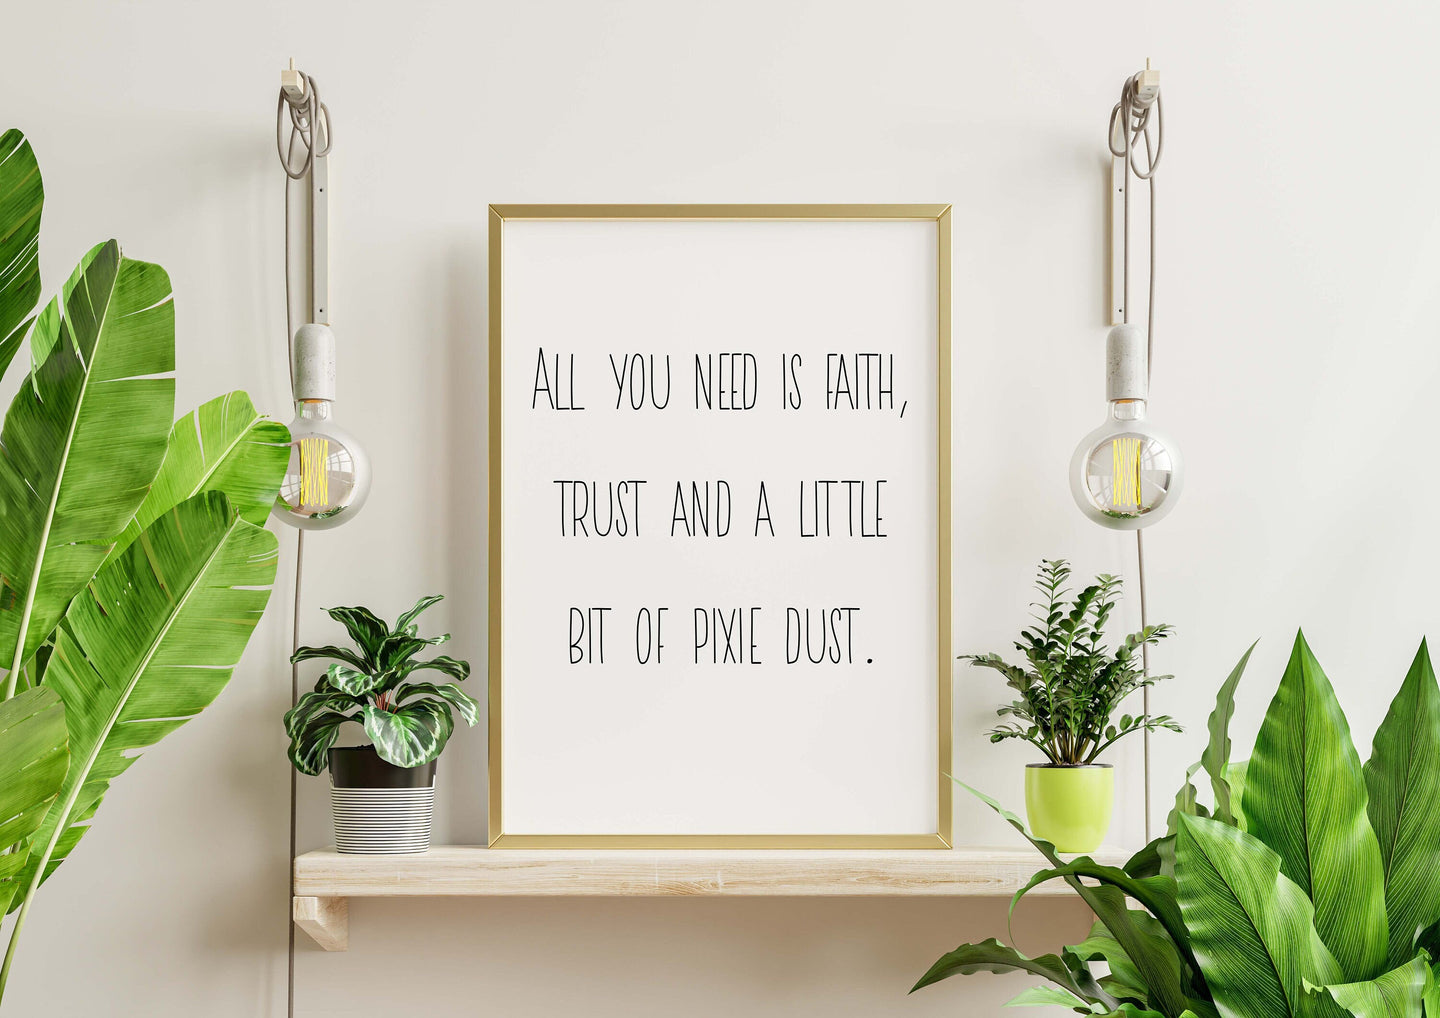 Peter Pan Print - All you need is faith, trust and a little bit of pixie dust